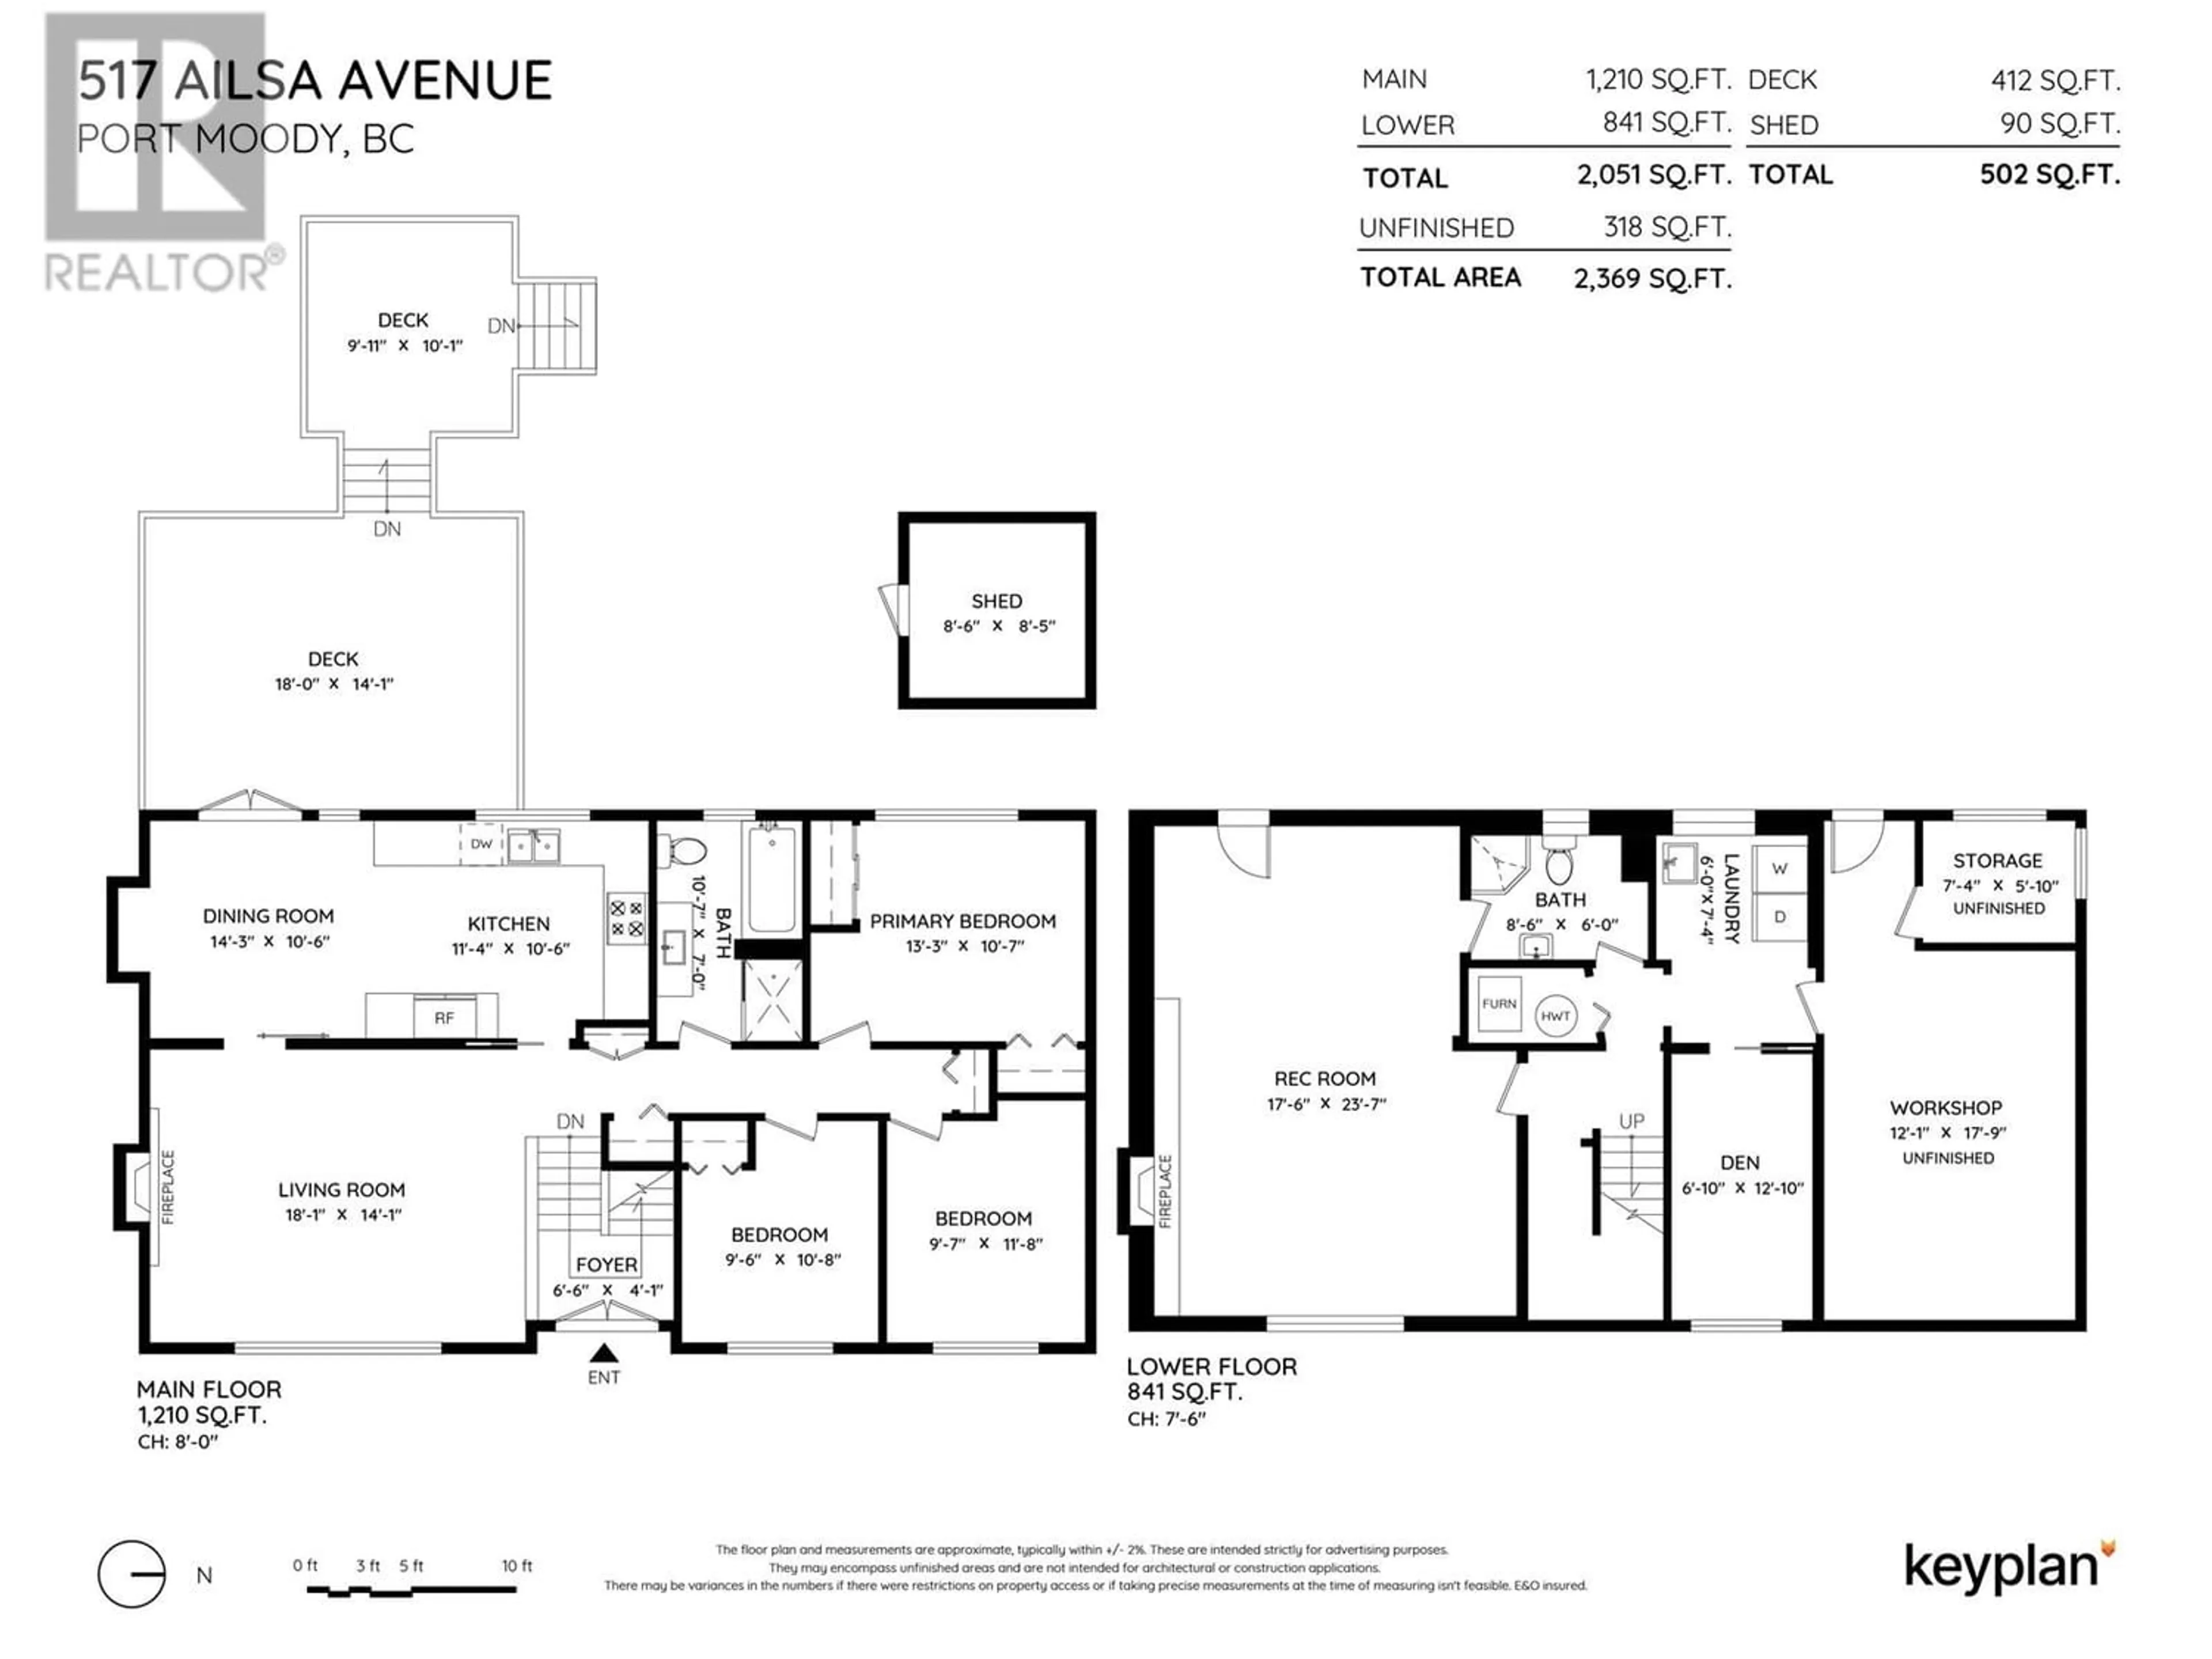 Floor plan for 517 AILSA AVENUE, Port Moody British Columbia V3H1A5